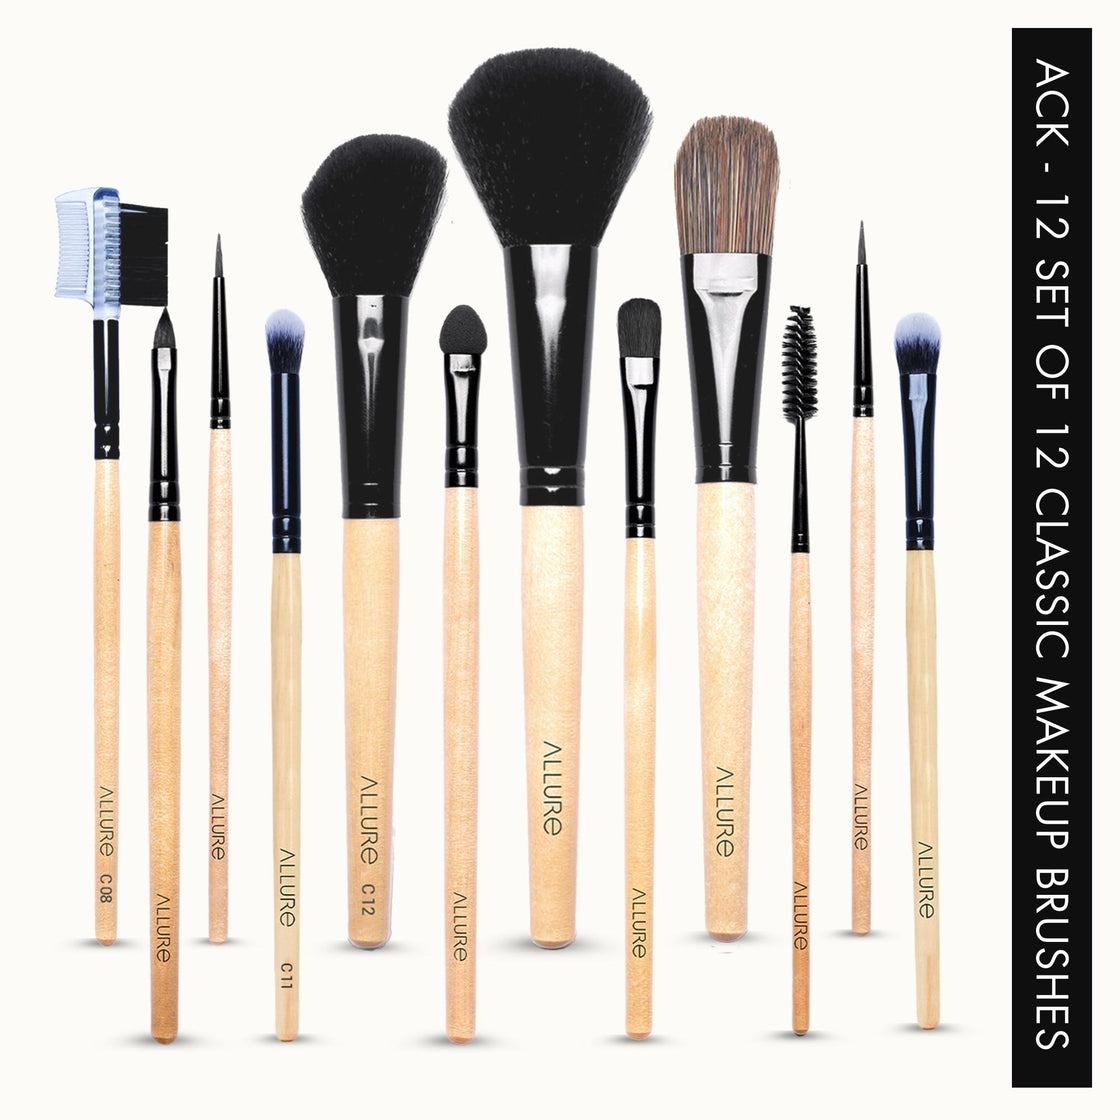 Allure Classic Makeup Brushes Pack Of 12  With Travel Pouch  ( ACK-12 )